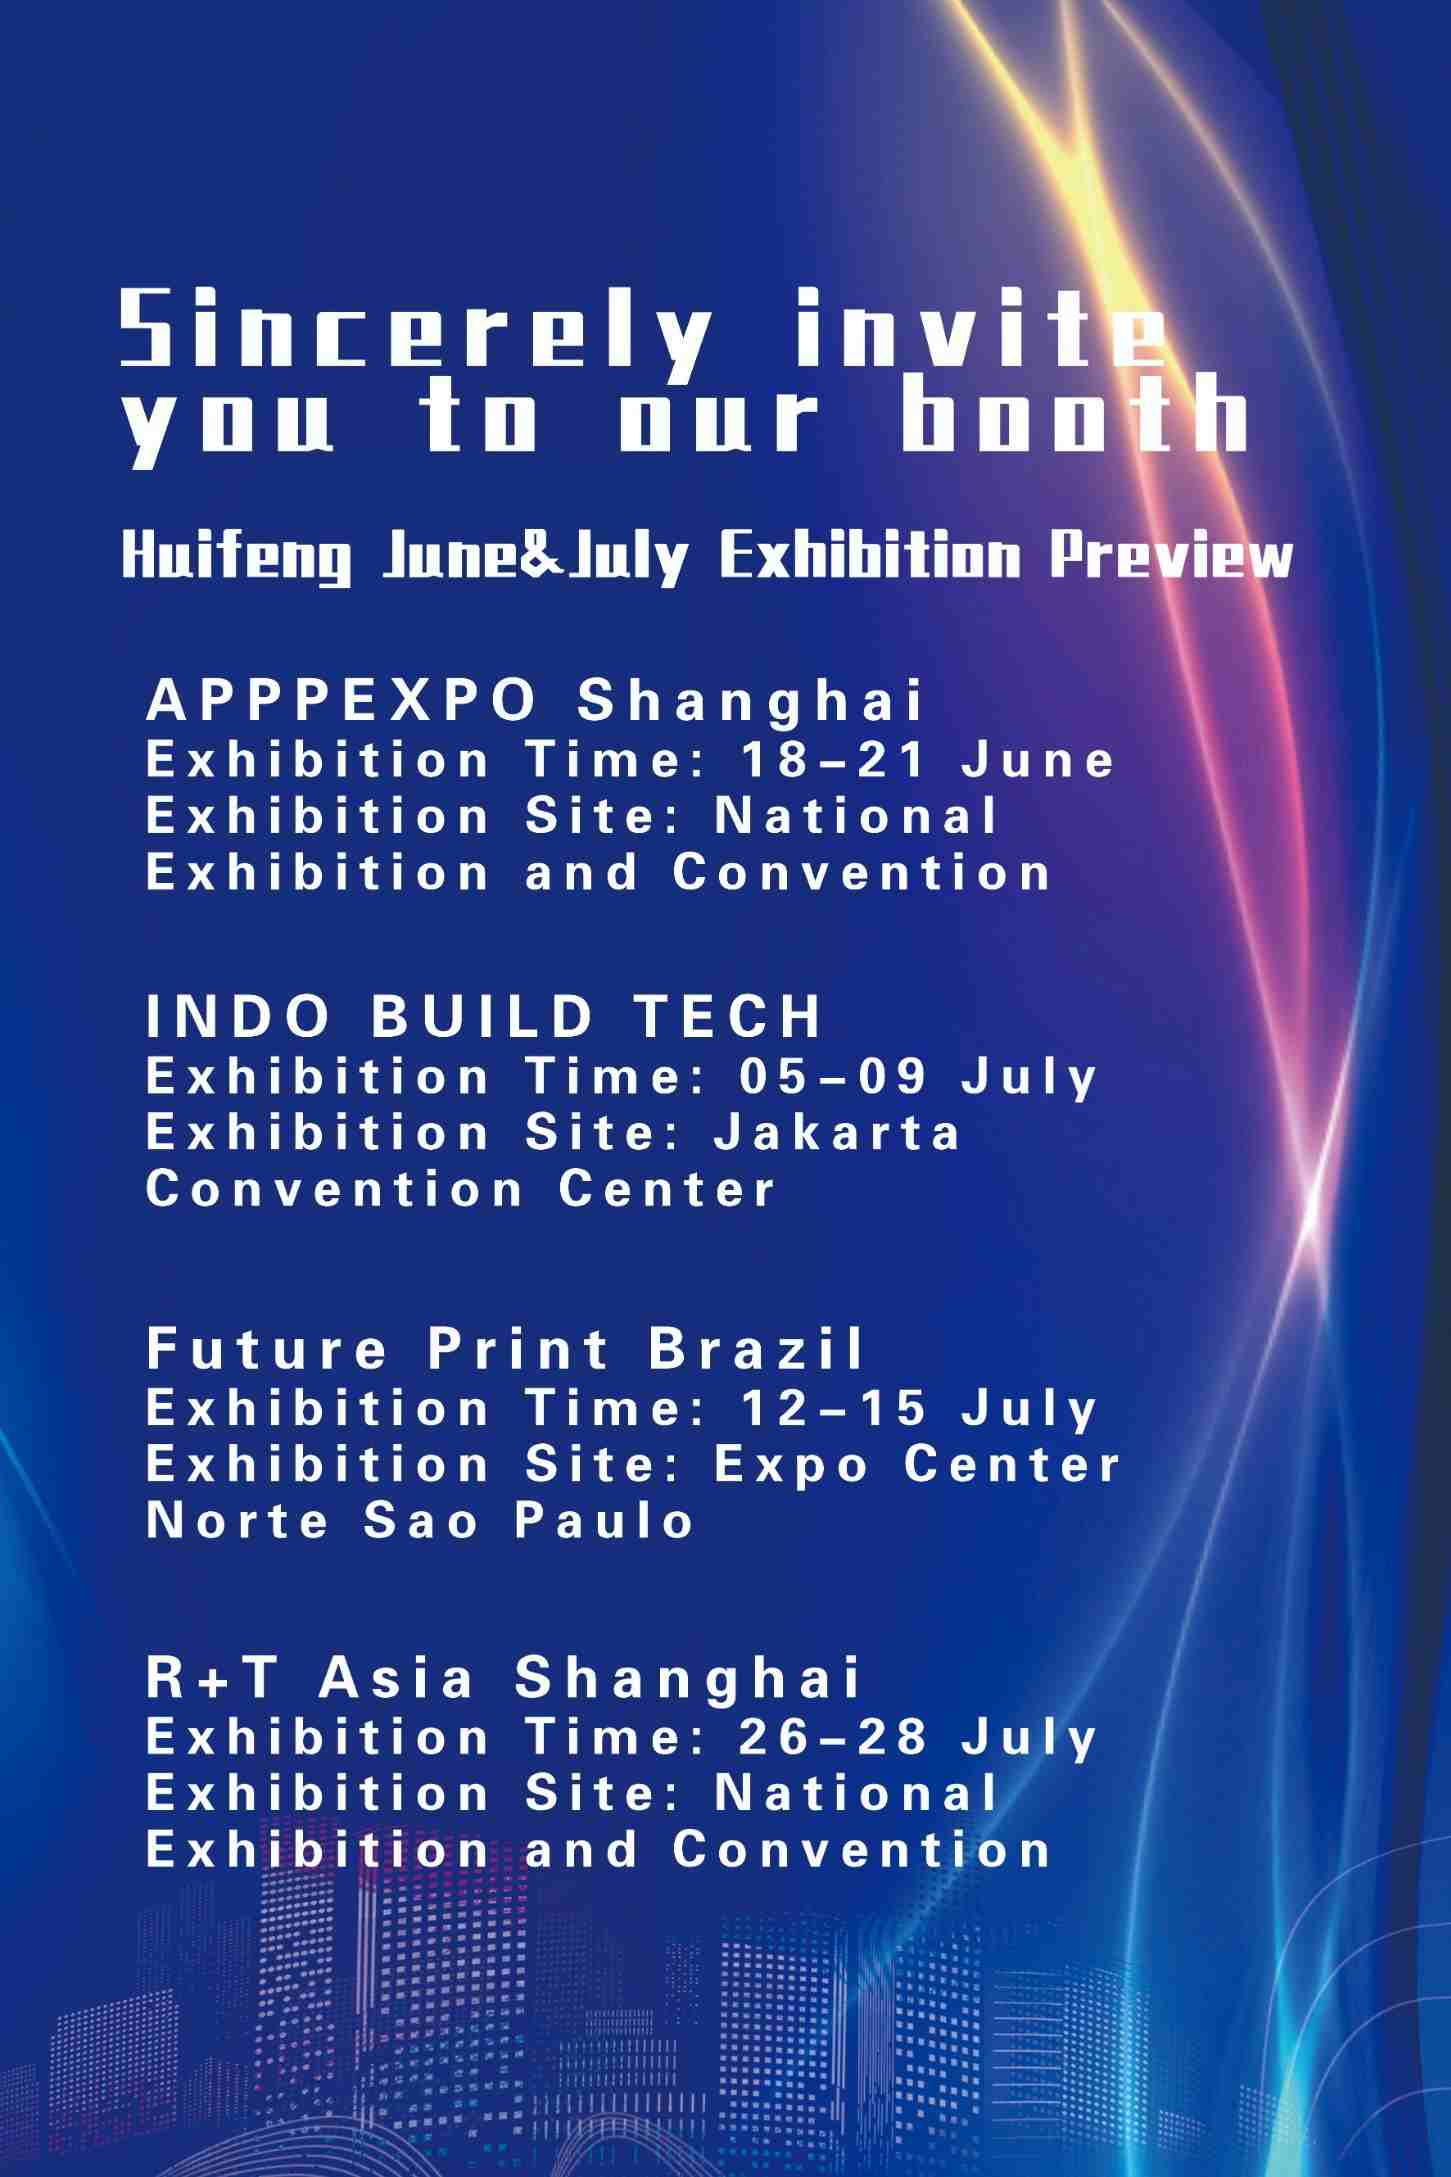 Sincerely invite you to our booth-Huifeng June&July Exhibition Preview